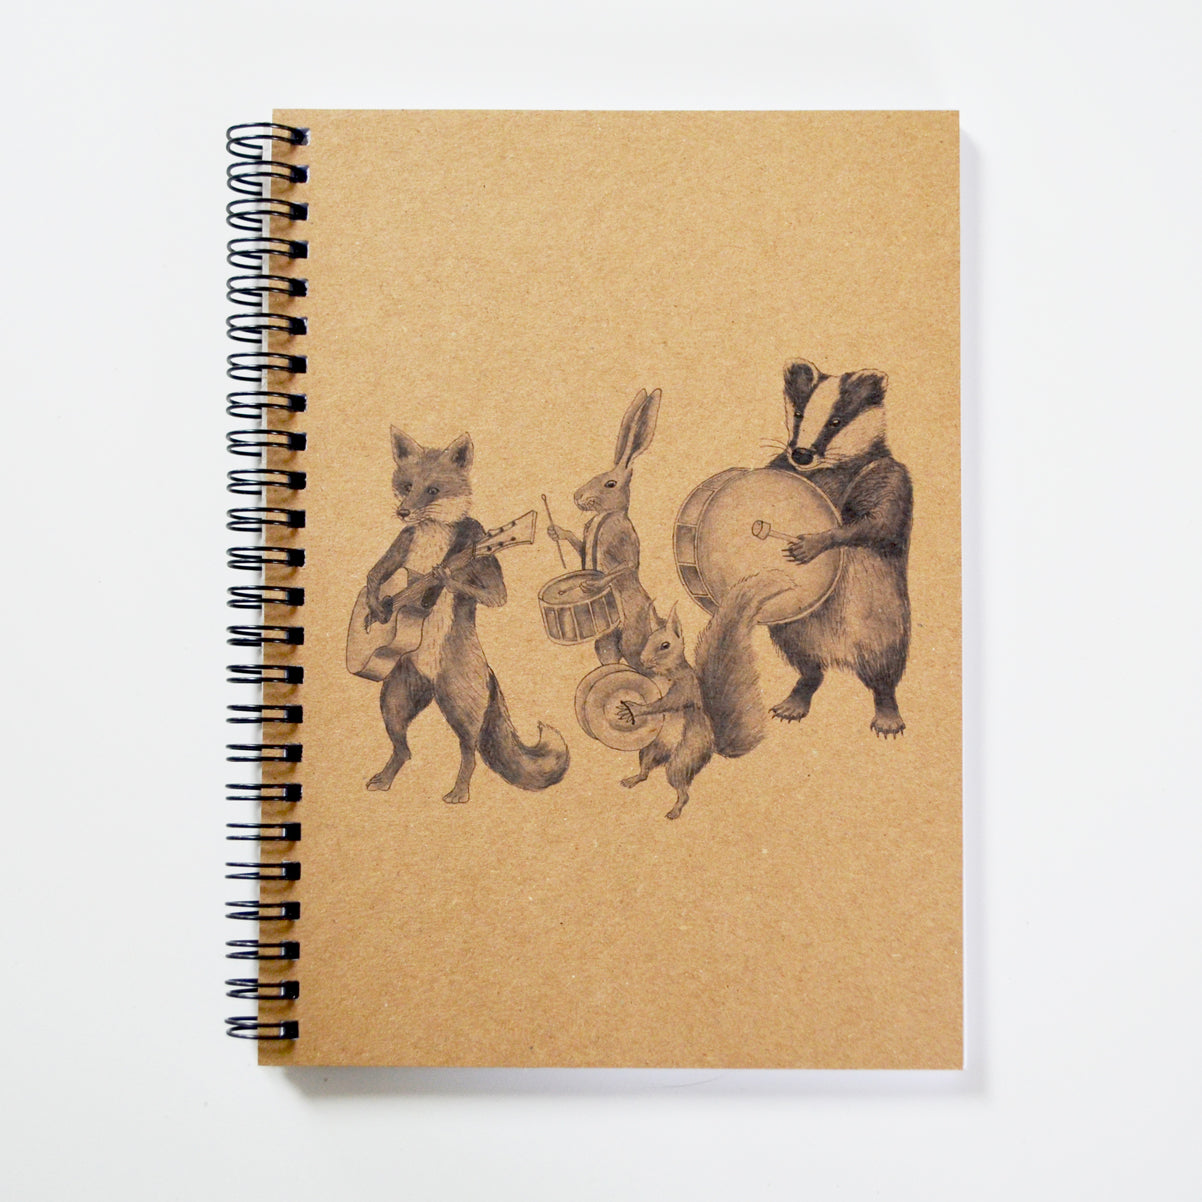 Marching Musical Animal Band - A5 Ethical Journal